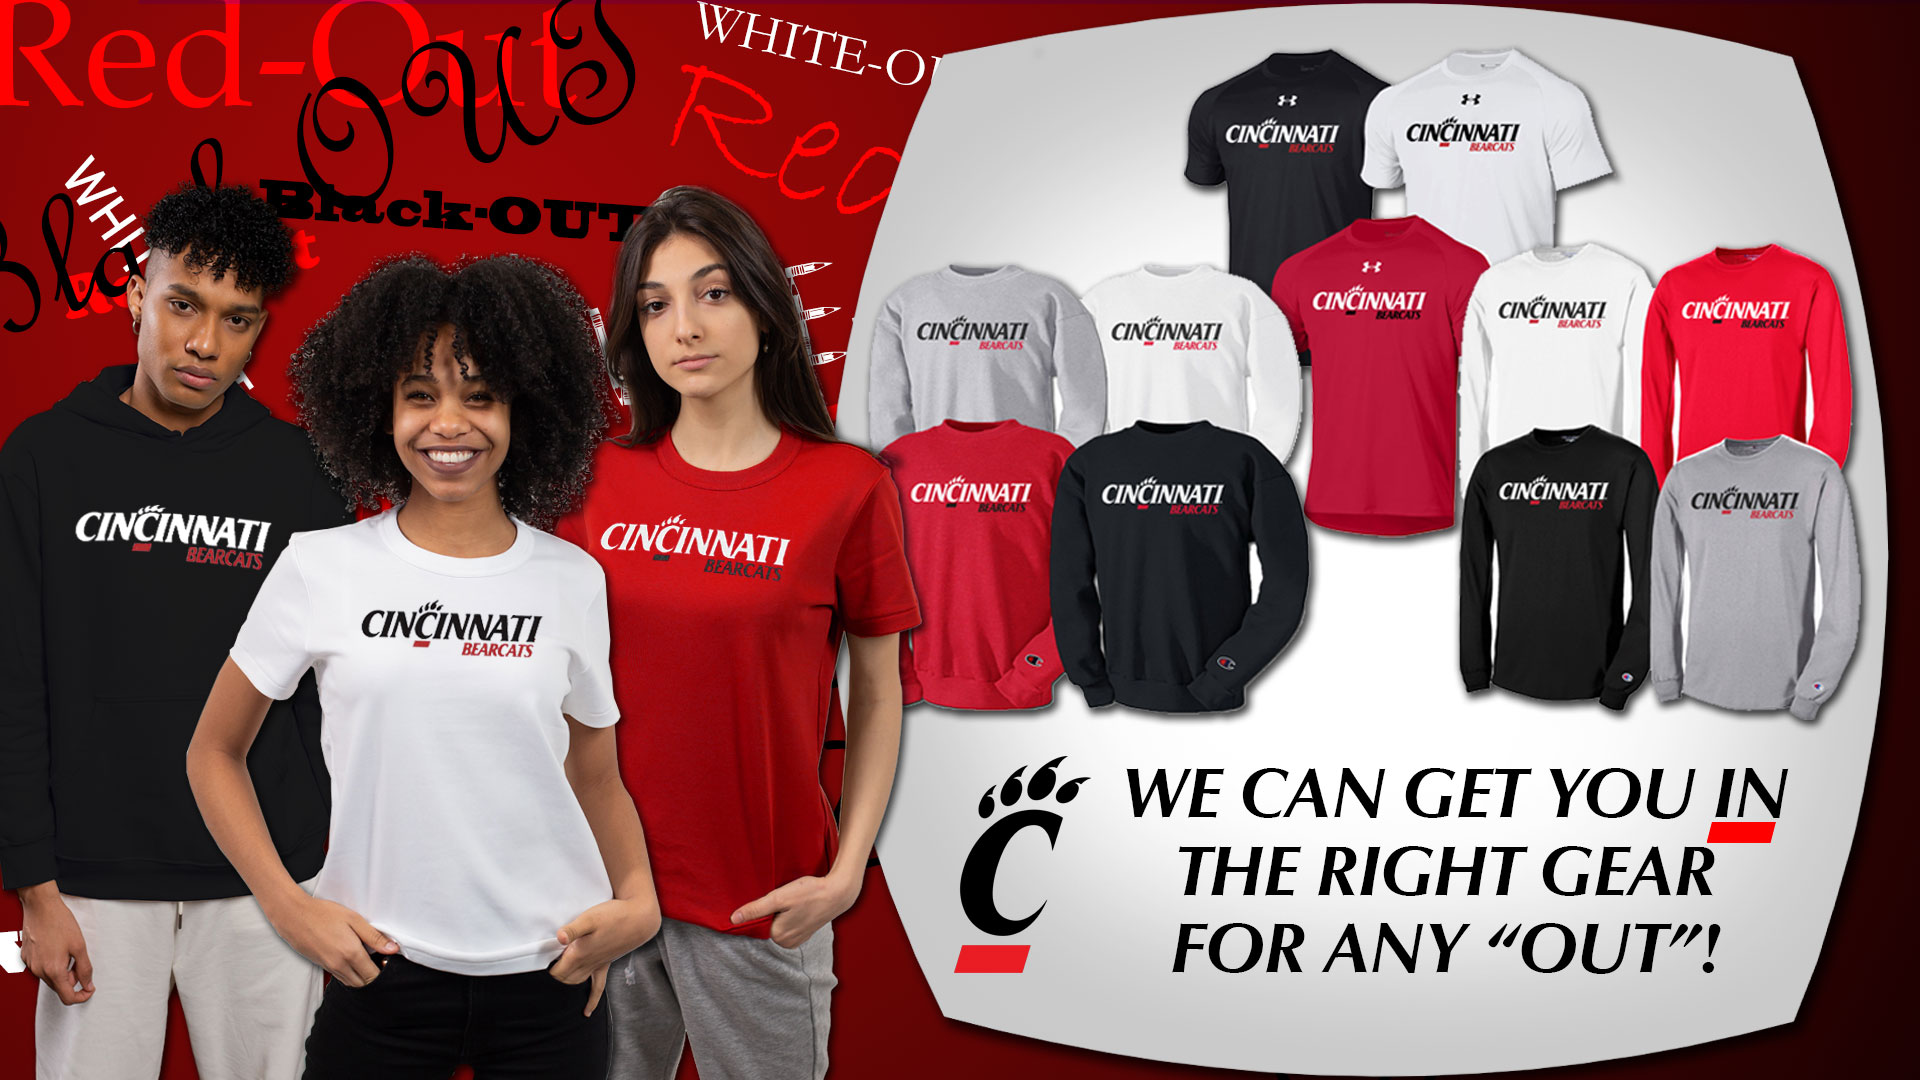 UC Red-Out, Black-Out, White-Out